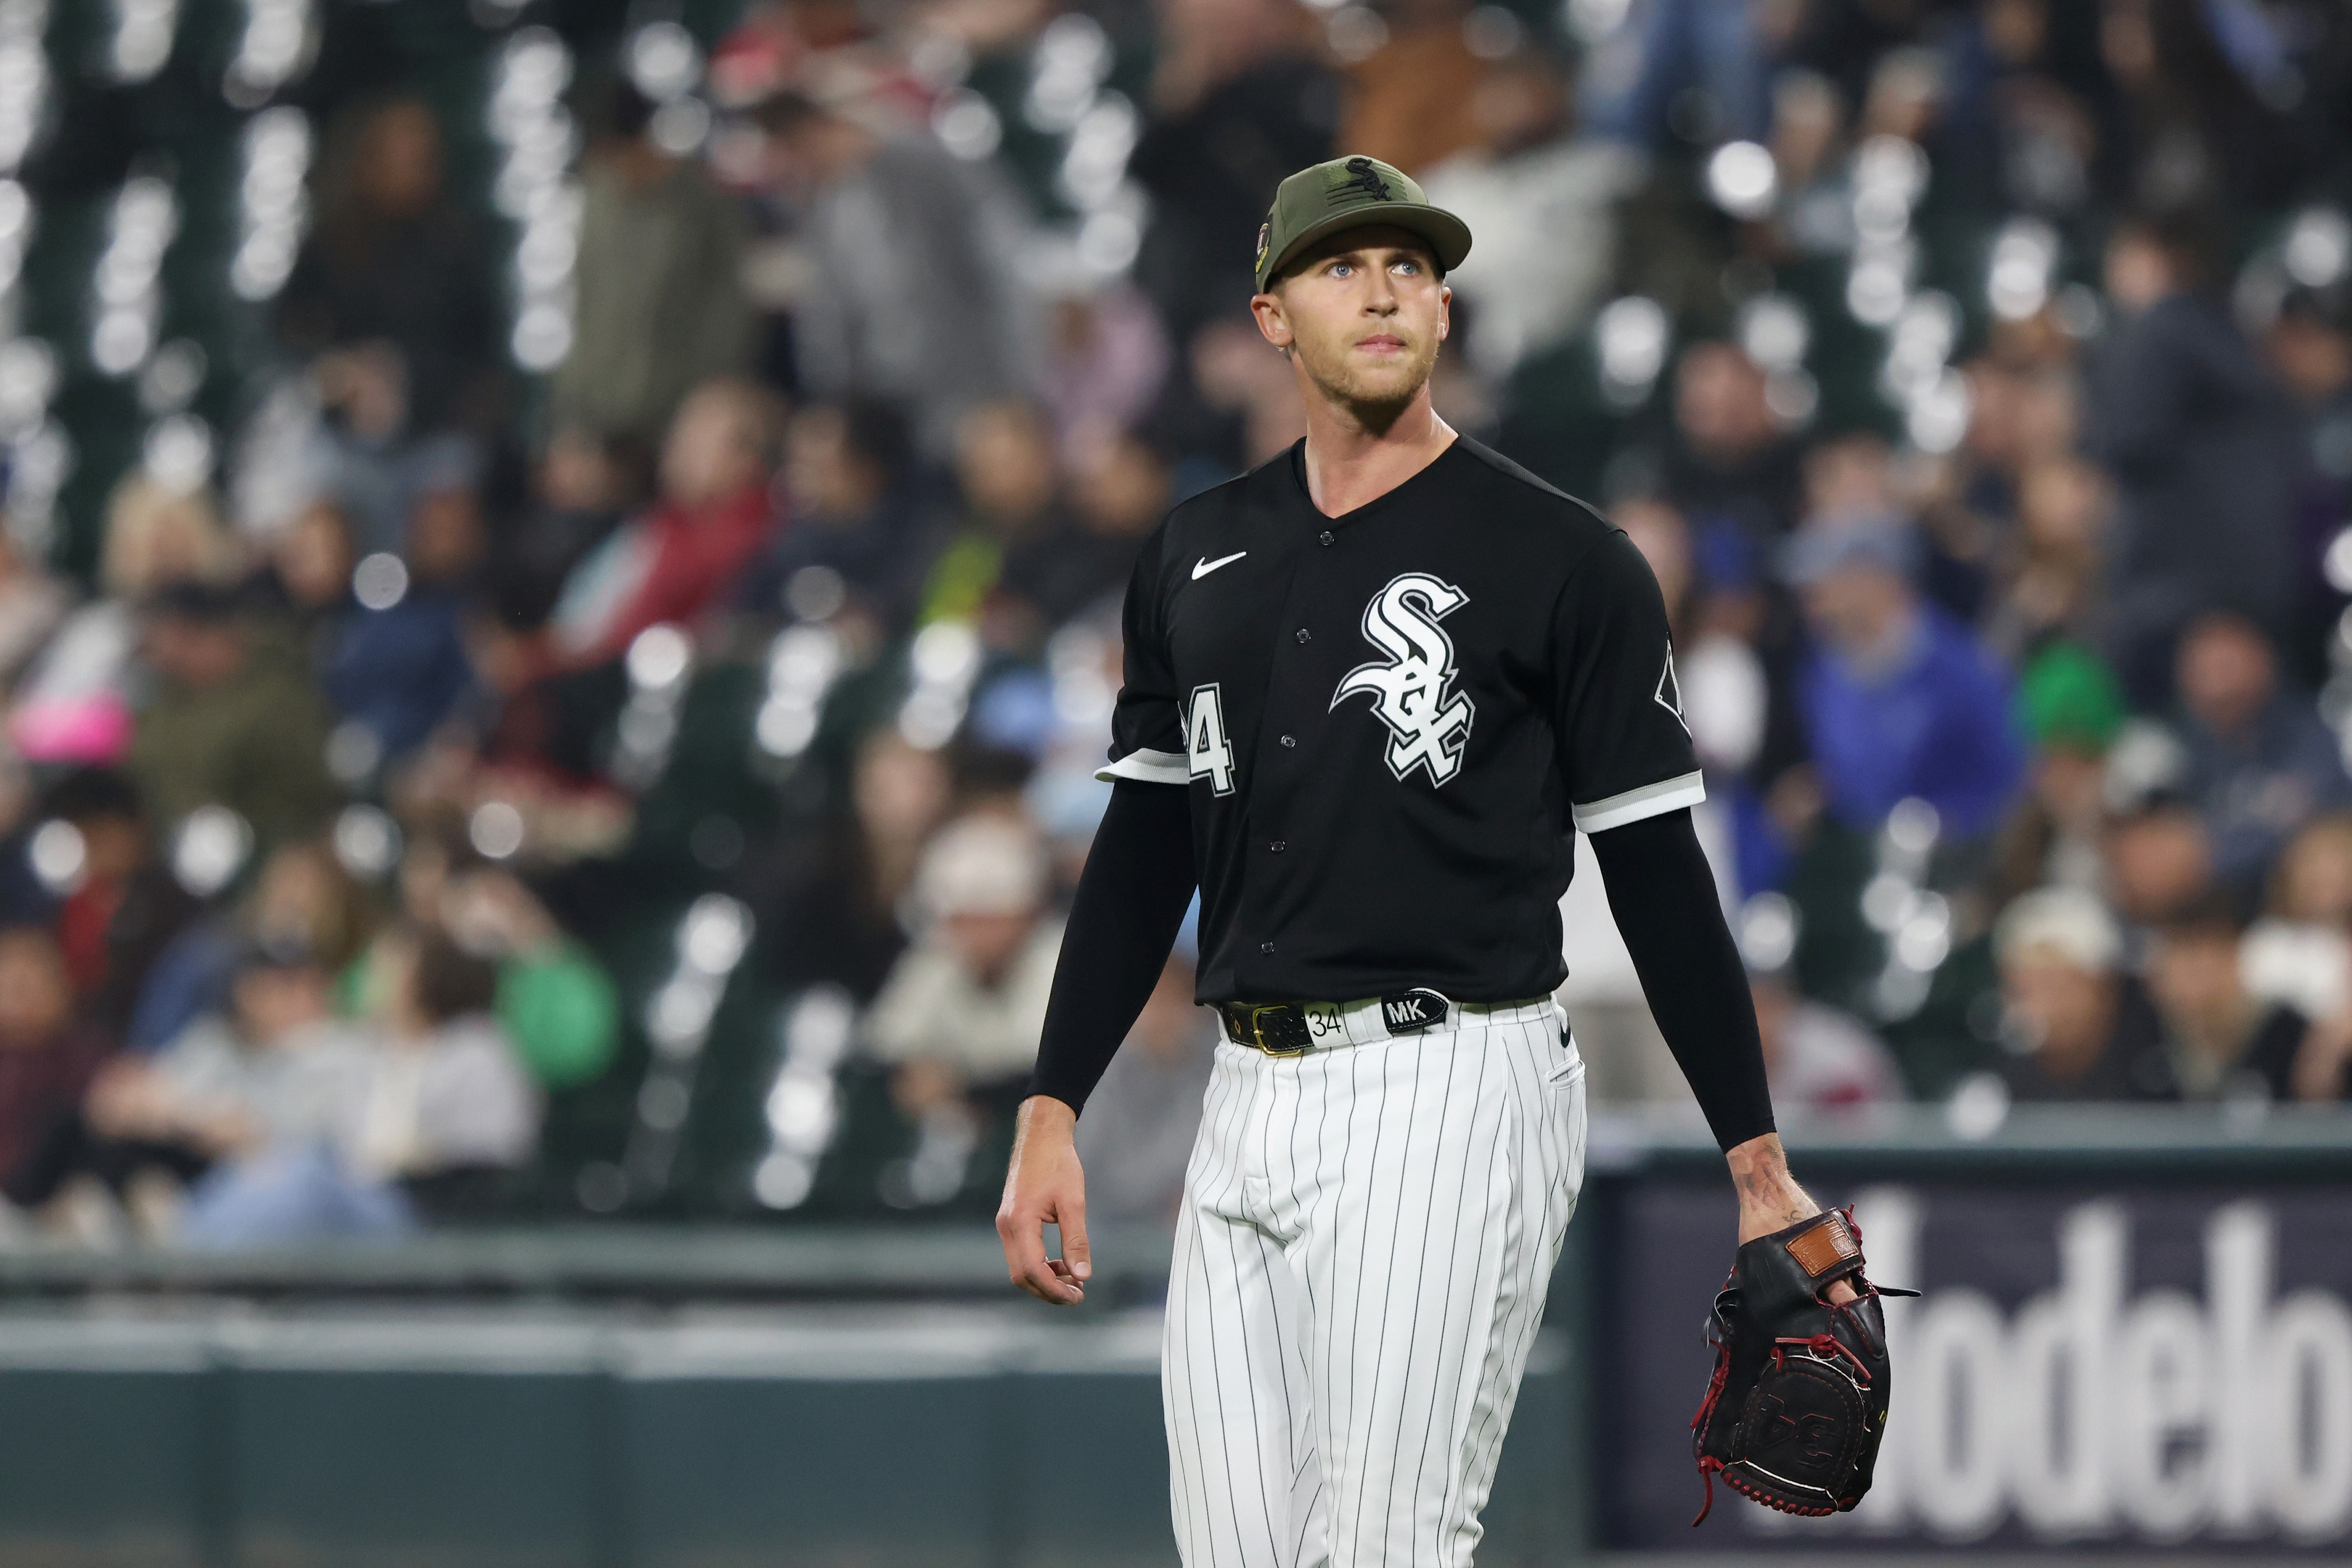 Michael Kopech: 5 Fast Facts You Need to Know